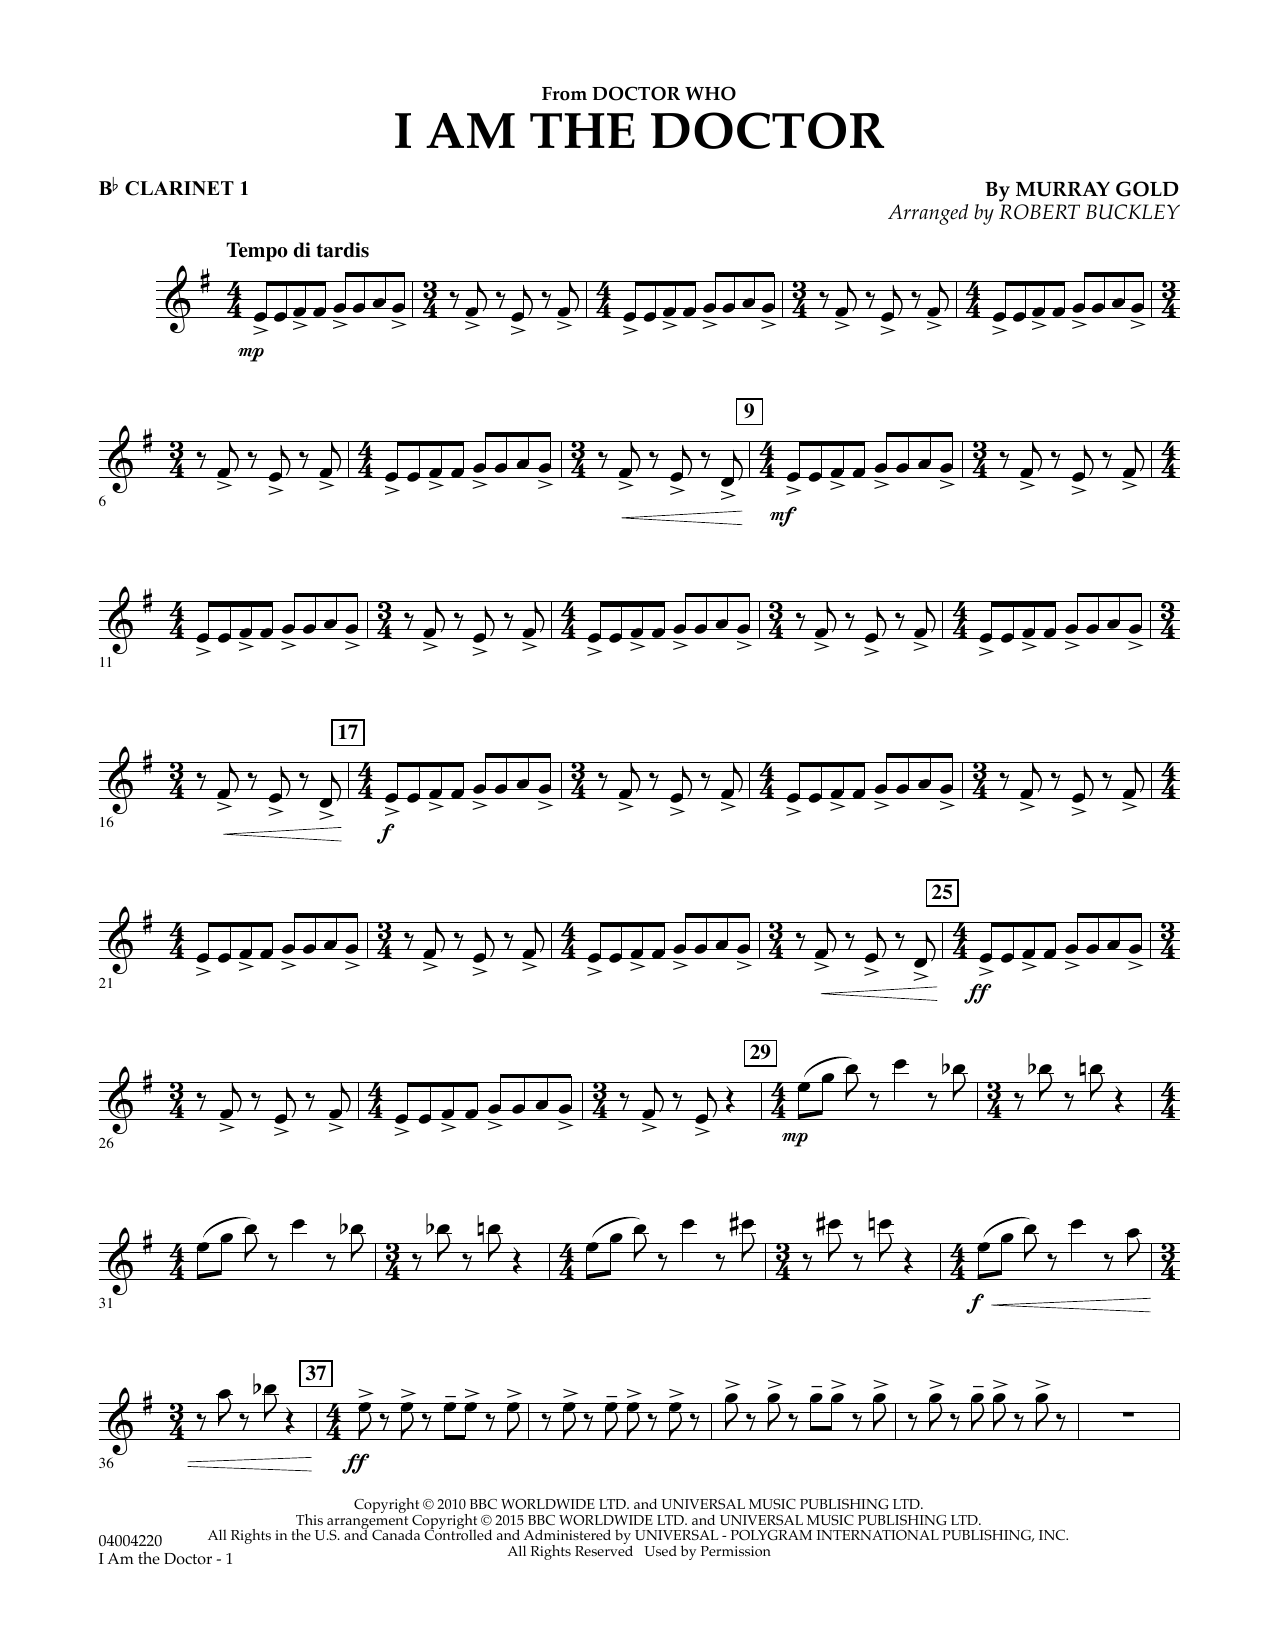 Robert Buckley I Am the Doctor (from Doctor Who) - Bb Clarinet 1 sheet music notes and chords. Download Printable PDF.